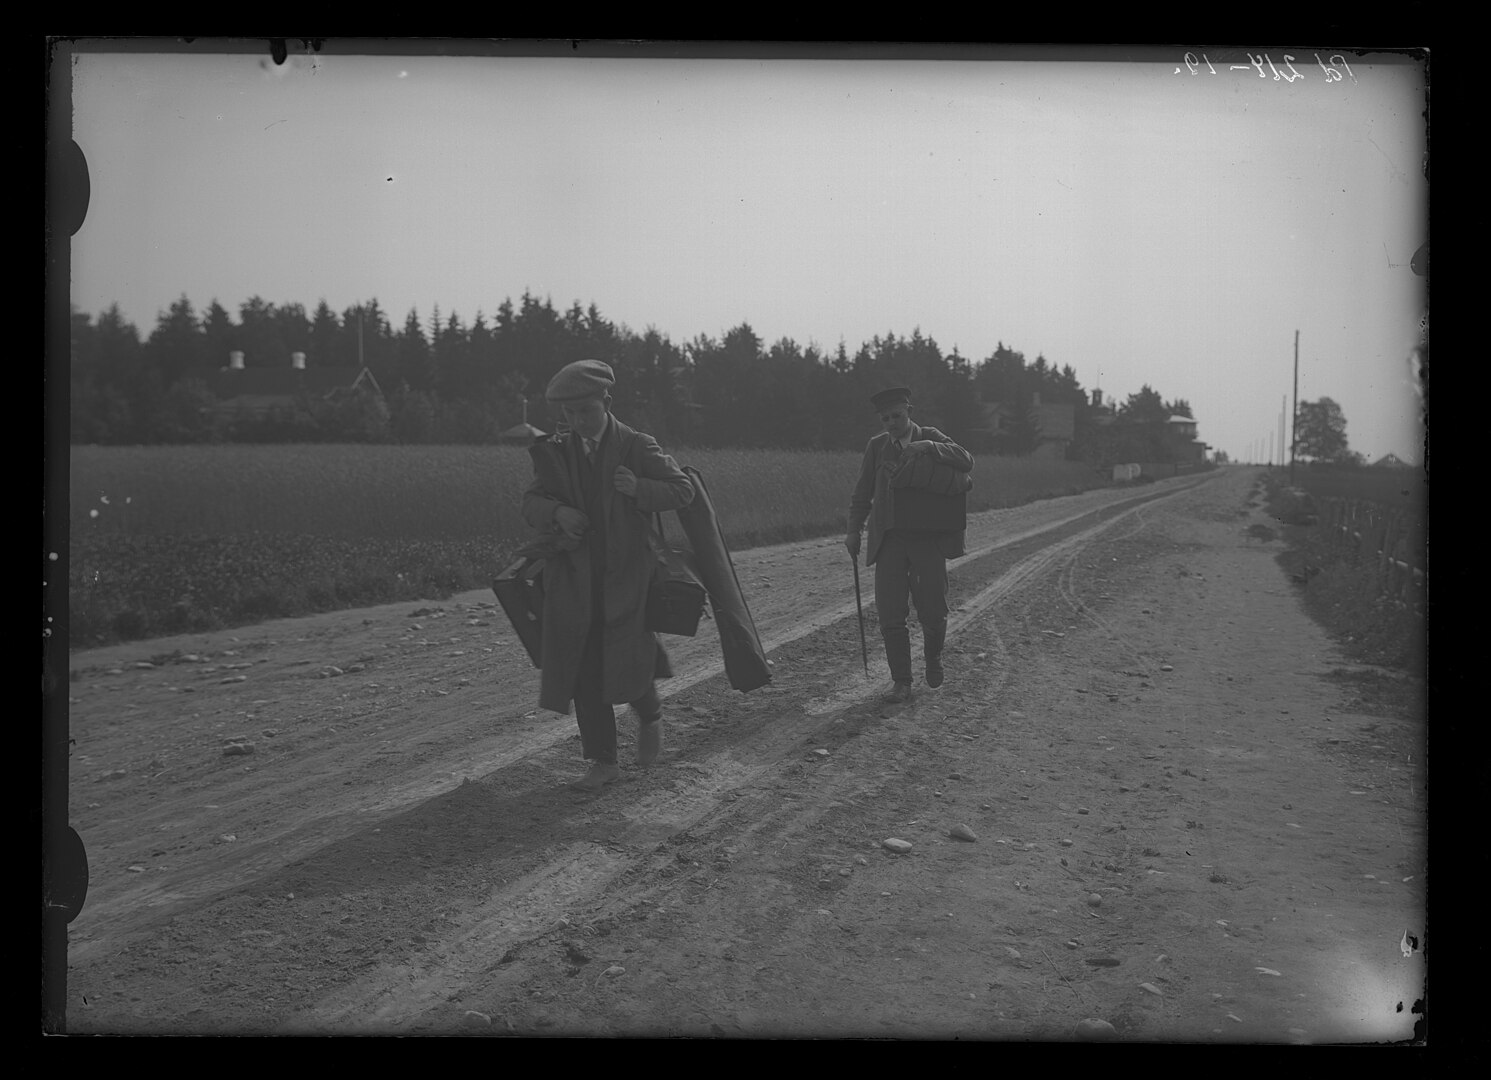 Black and white picture: Pääsuke and his assistant trudge along a dirt road in rural Estonia. They are both heavily laden with bags and equipment.